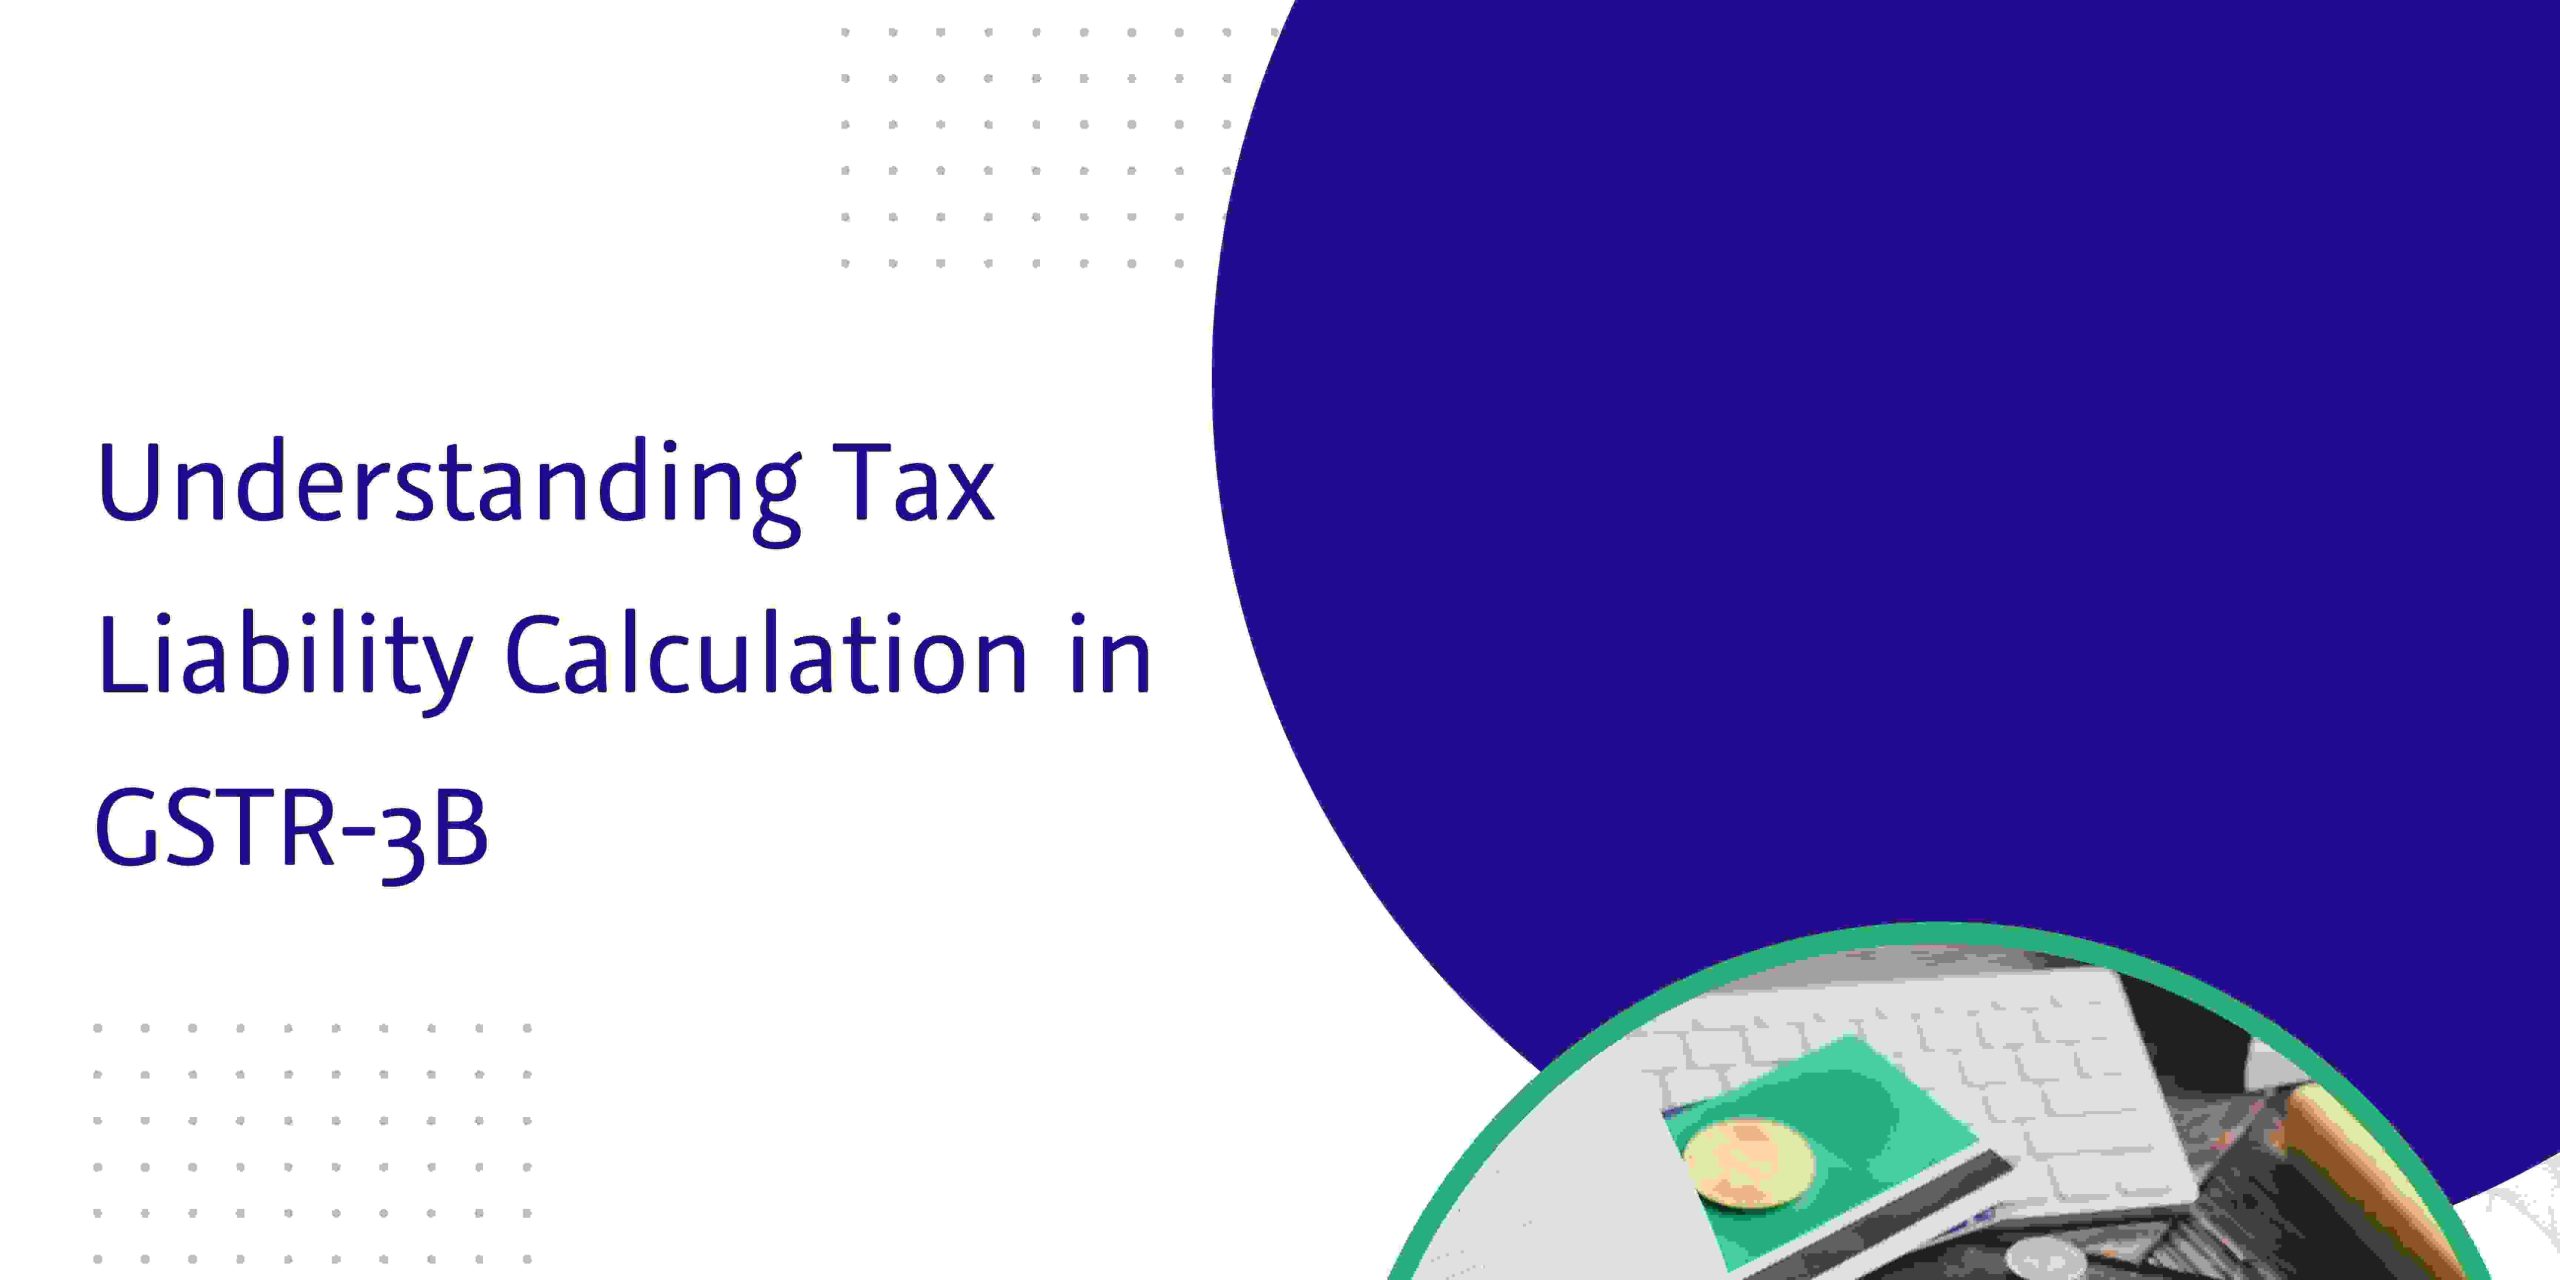 You are currently viewing Understanding Tax Liability Calculation in GSTR-3B